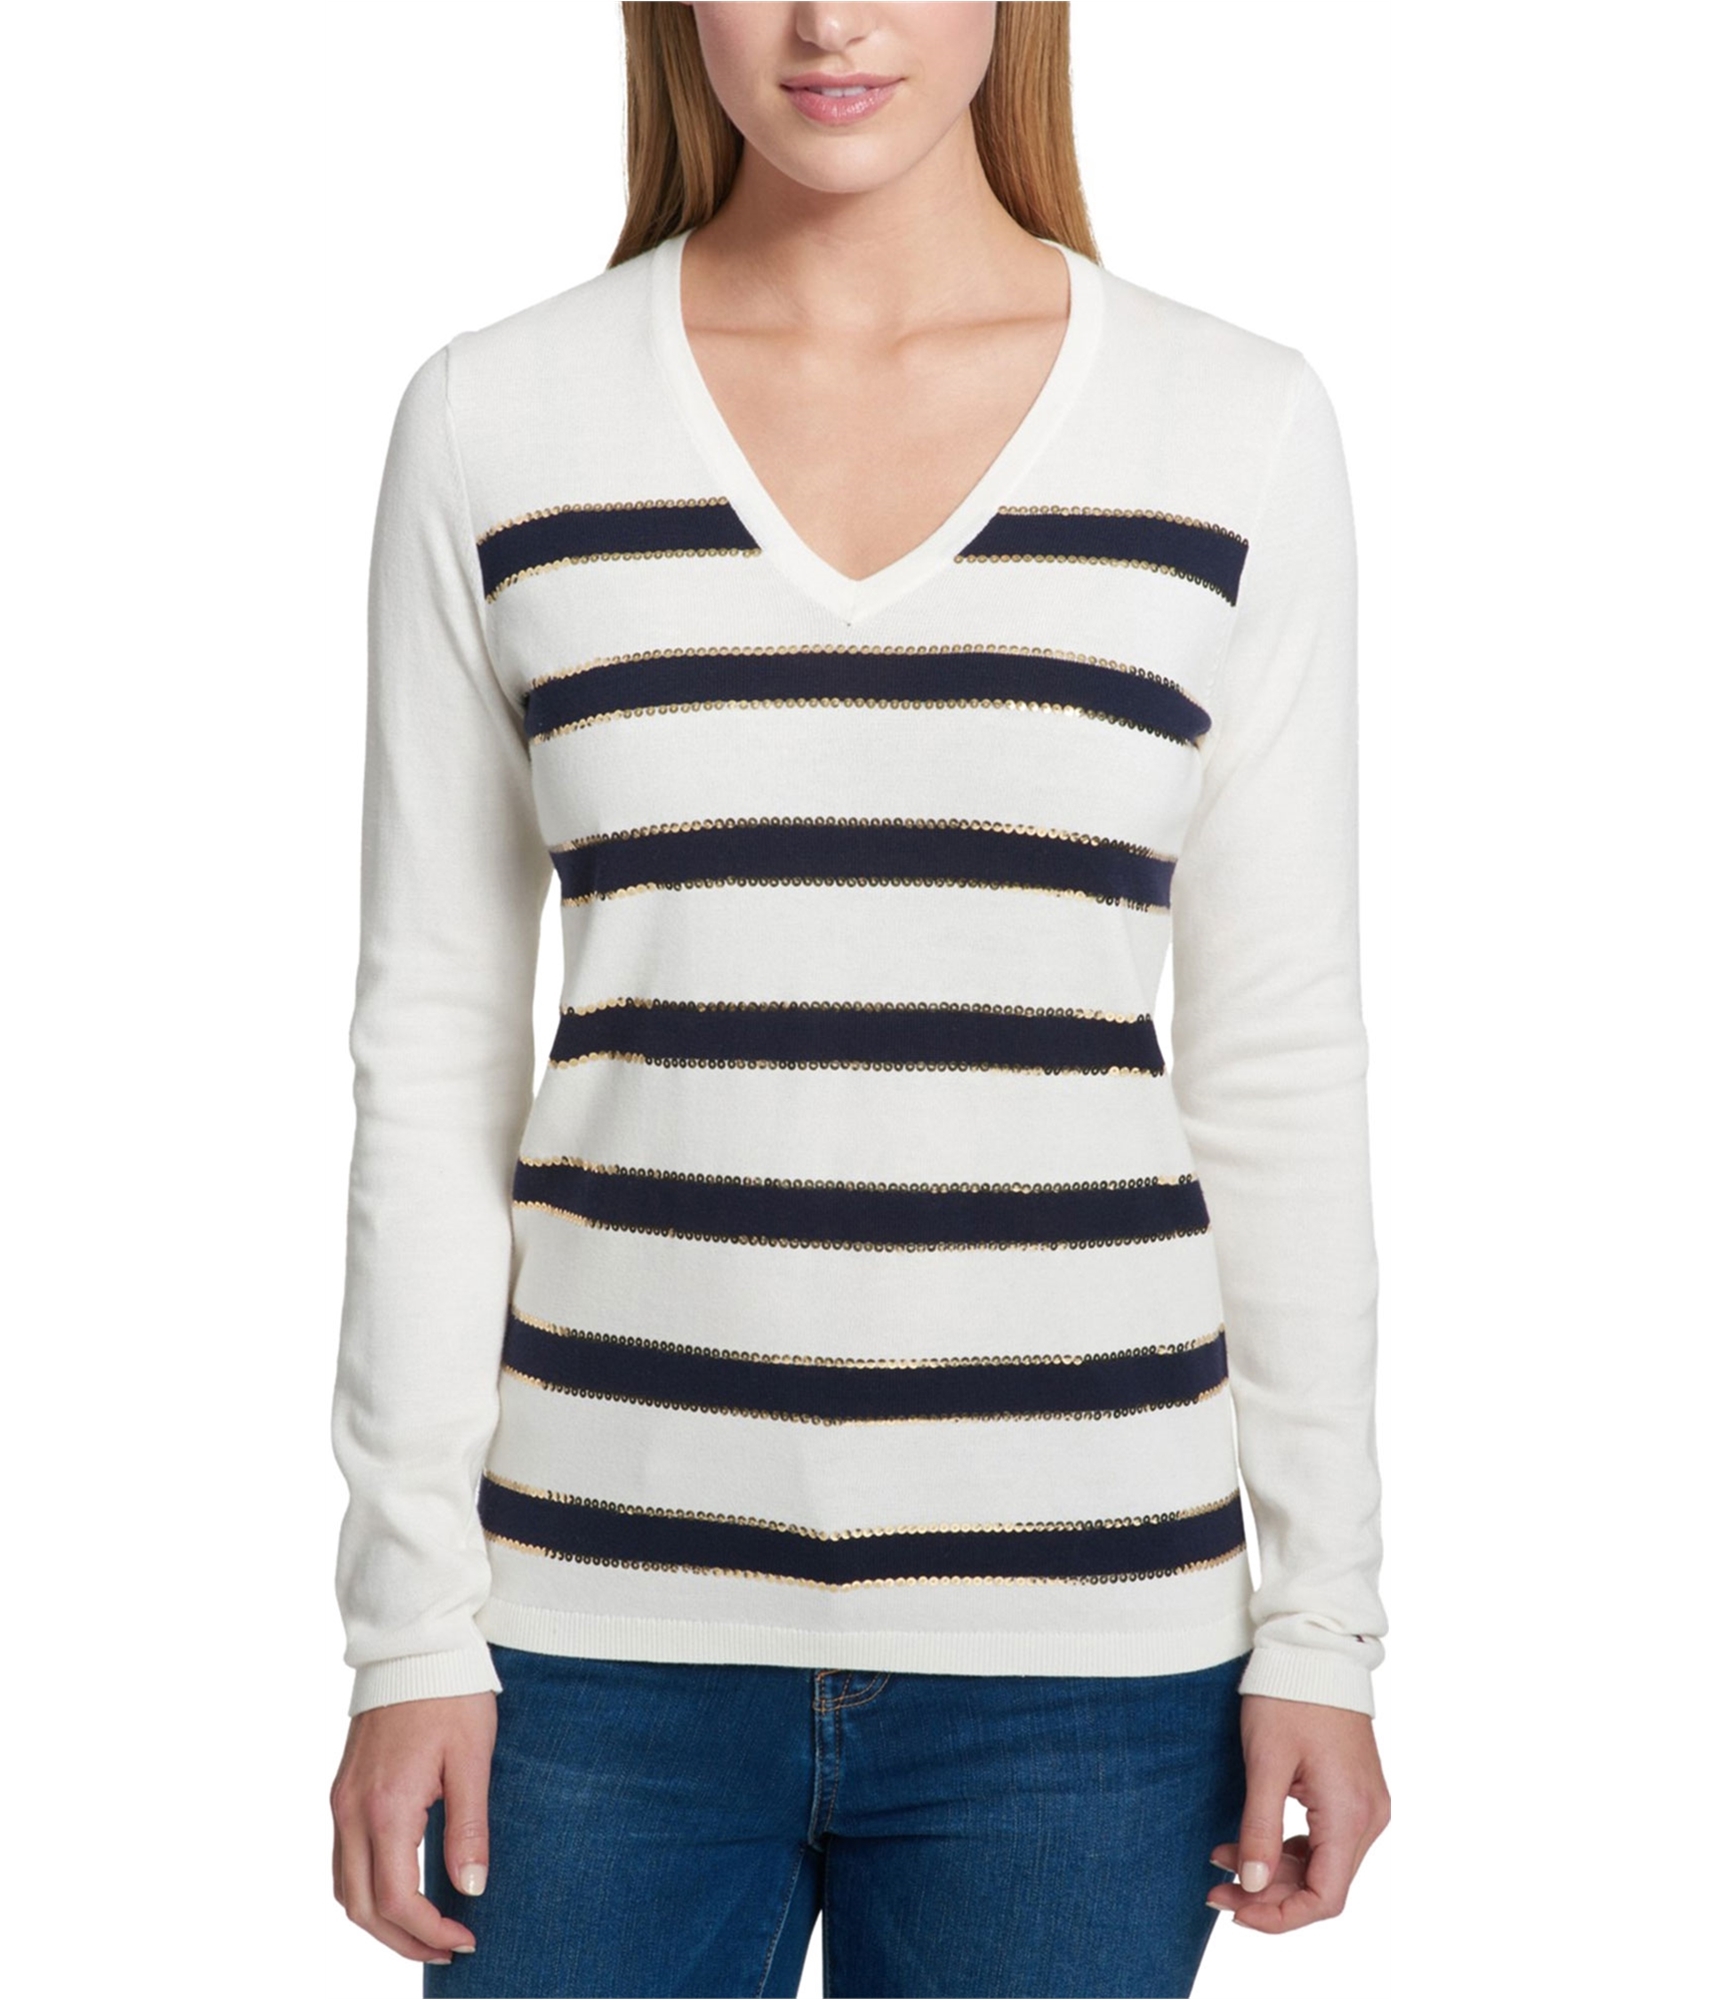 Buy Womens Hilfiger Sequin-Stripe Pullover Sweater | TagsWeekly.com